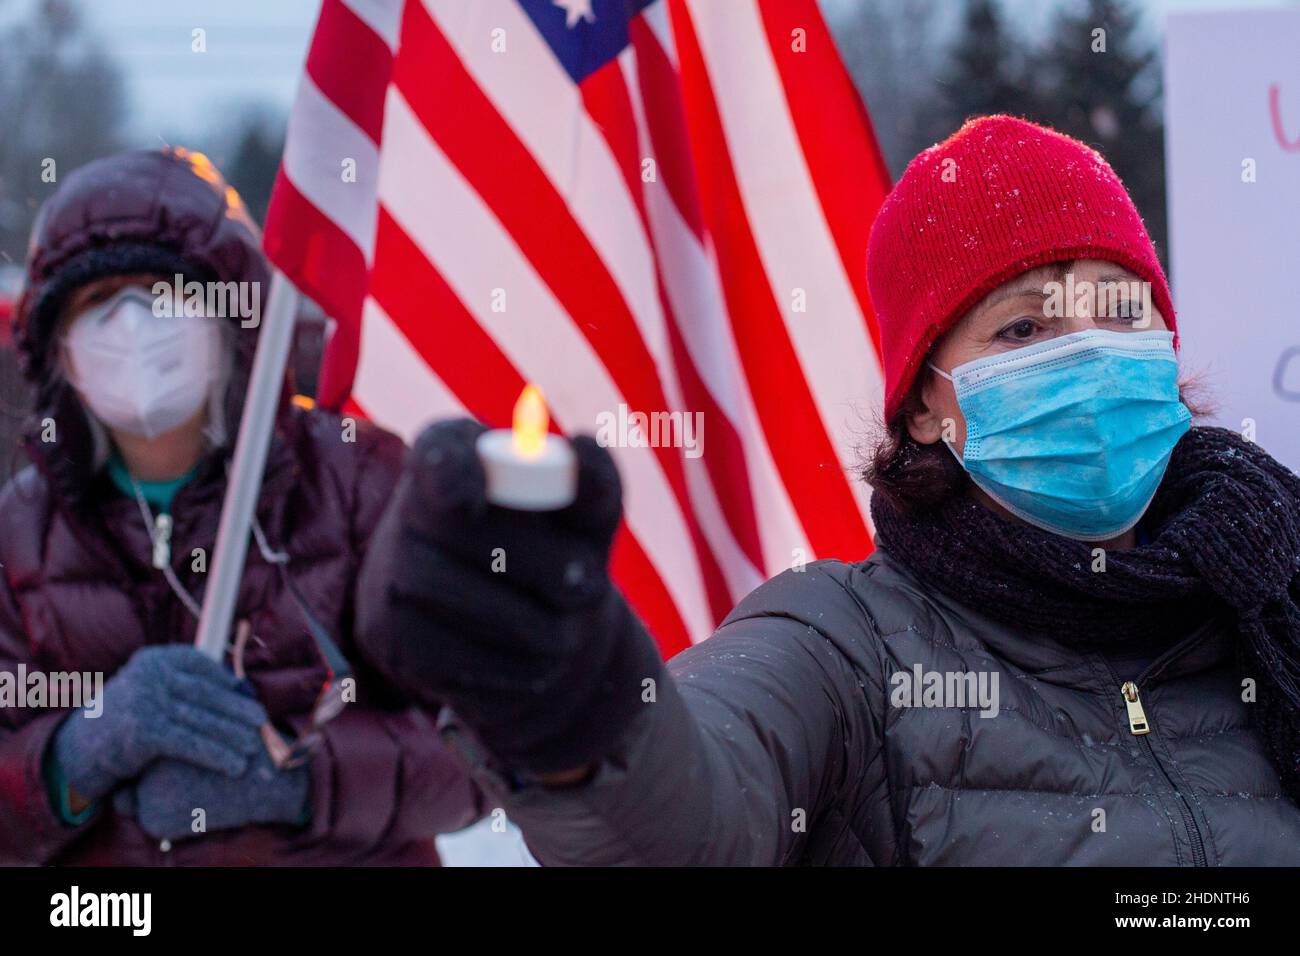 Rochester Hills, Michigan, USA. 6th Jan, 2022. A rally and vigil remembers and protests the violent attack on the U.S. Capitol a year earlier and opposes voting restrictions and efforts to sabotage free and fair elections. Similar vigils were held around the country. Credit: Jim West/Alamy Live News Stock Photo